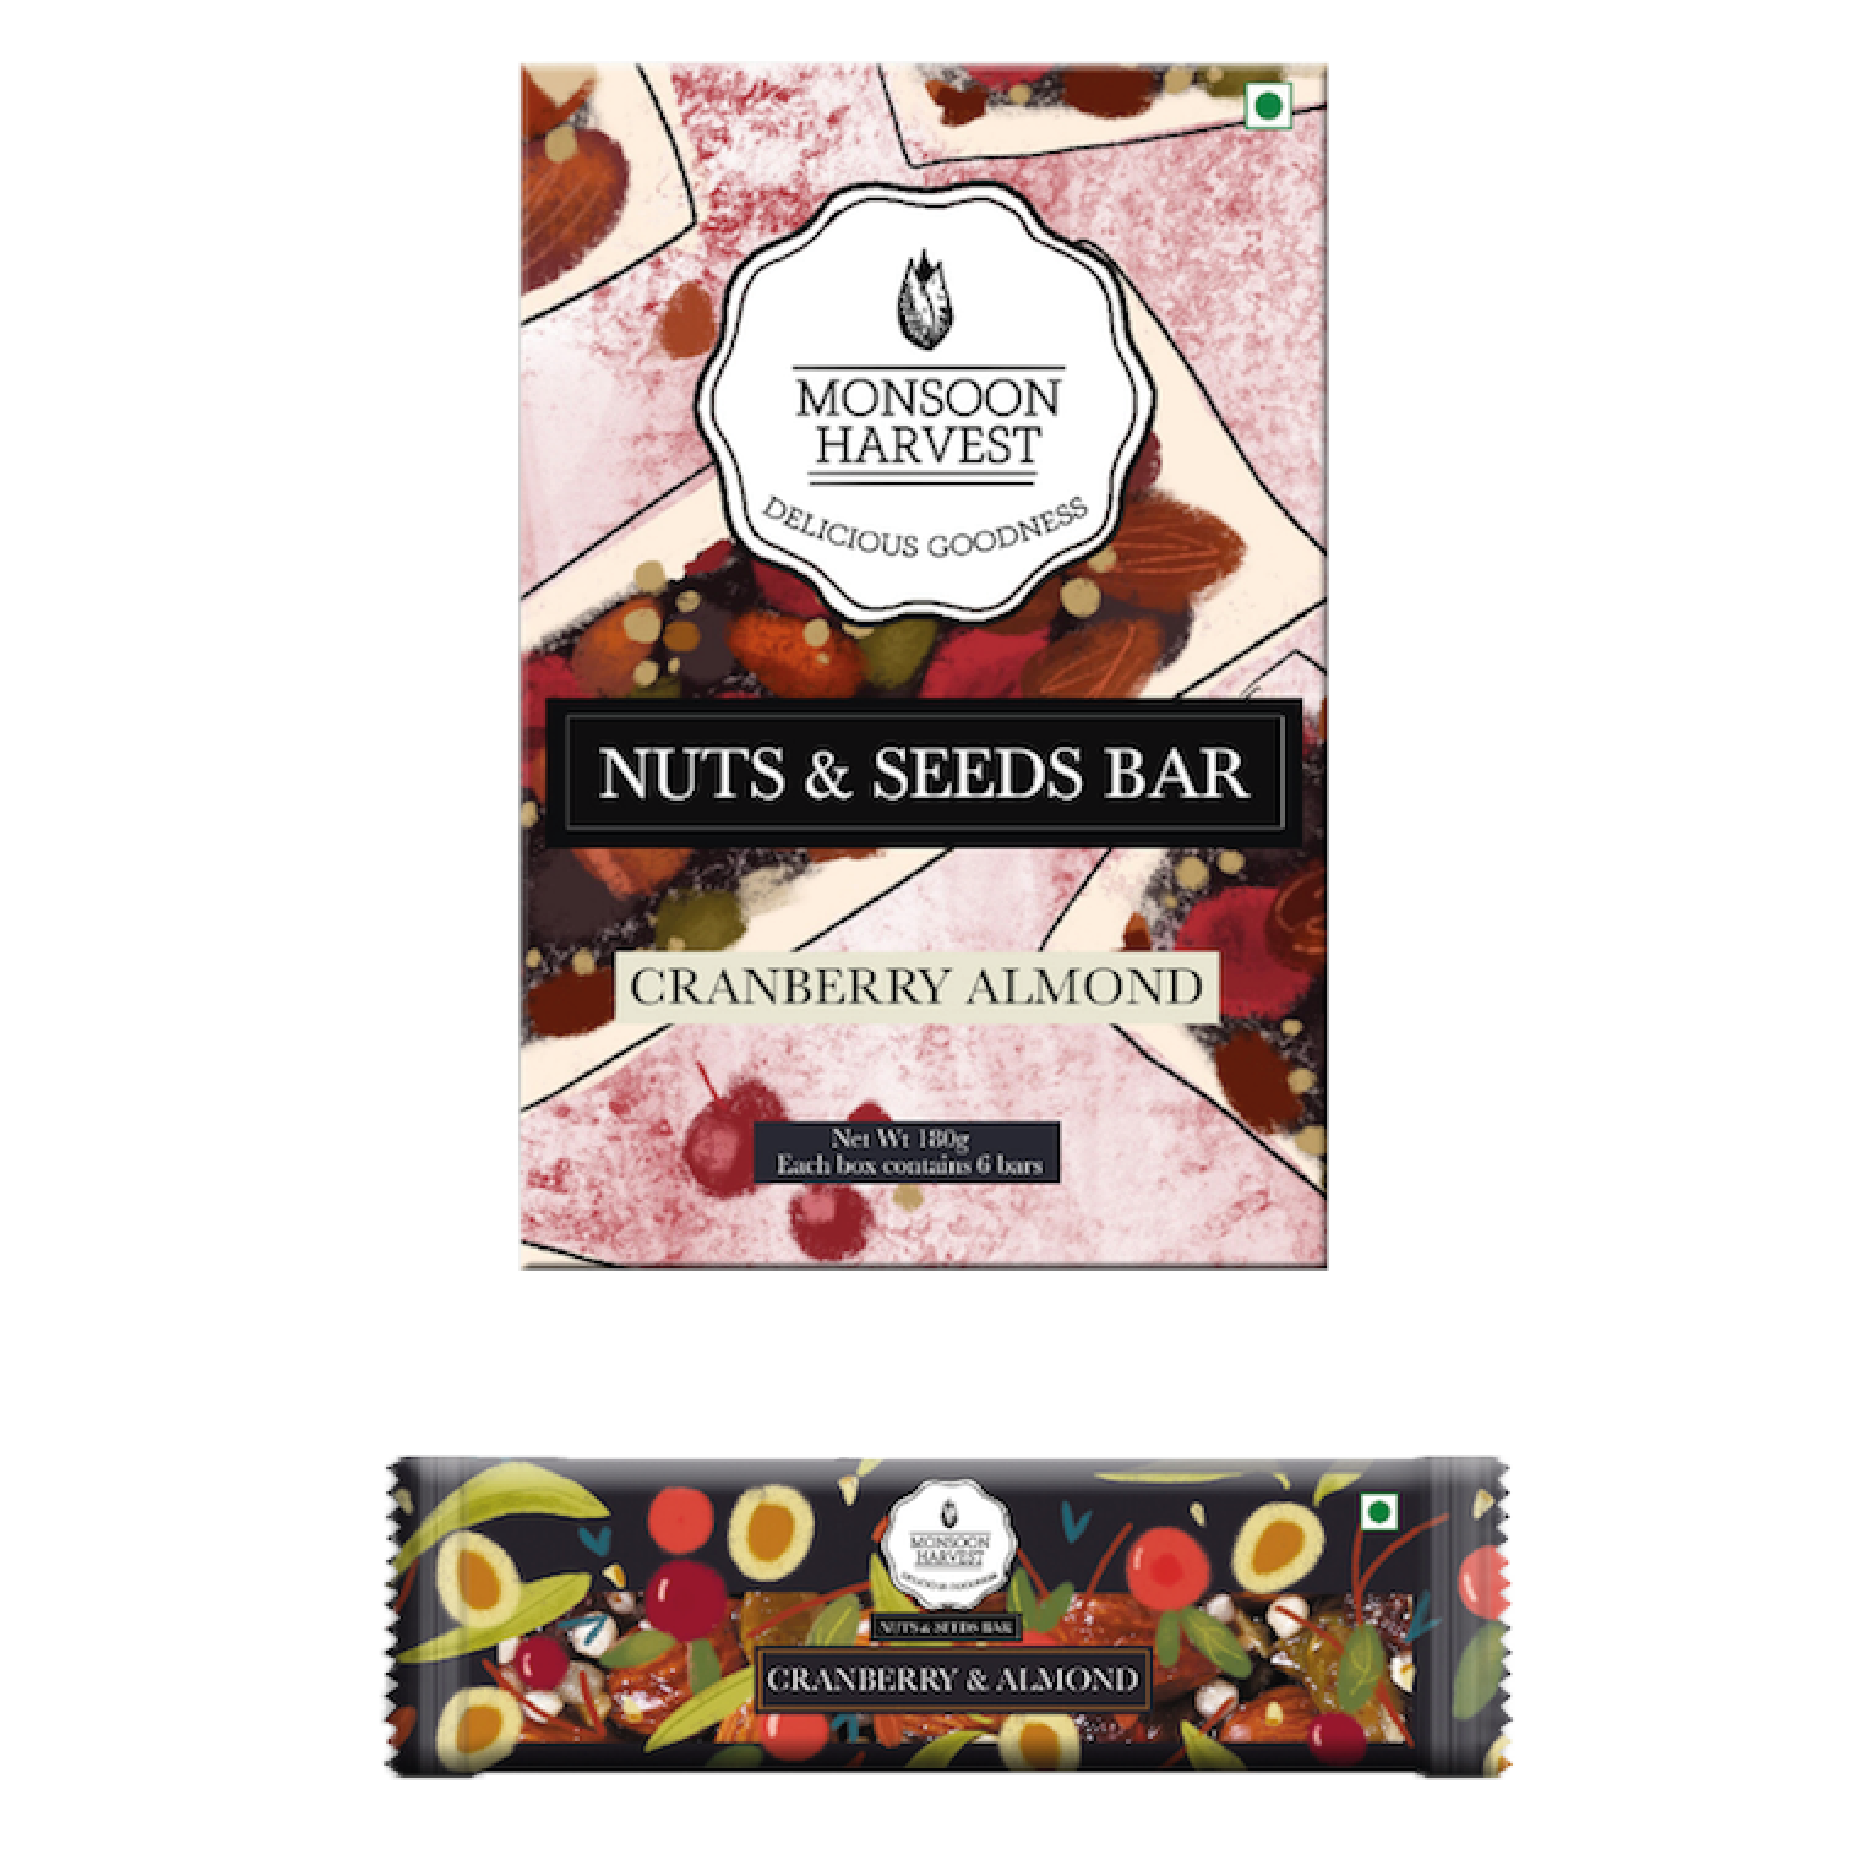 Monsoon Harvest Nuts & Seeds Bar - Cranberry & Almond (Pack of 6)